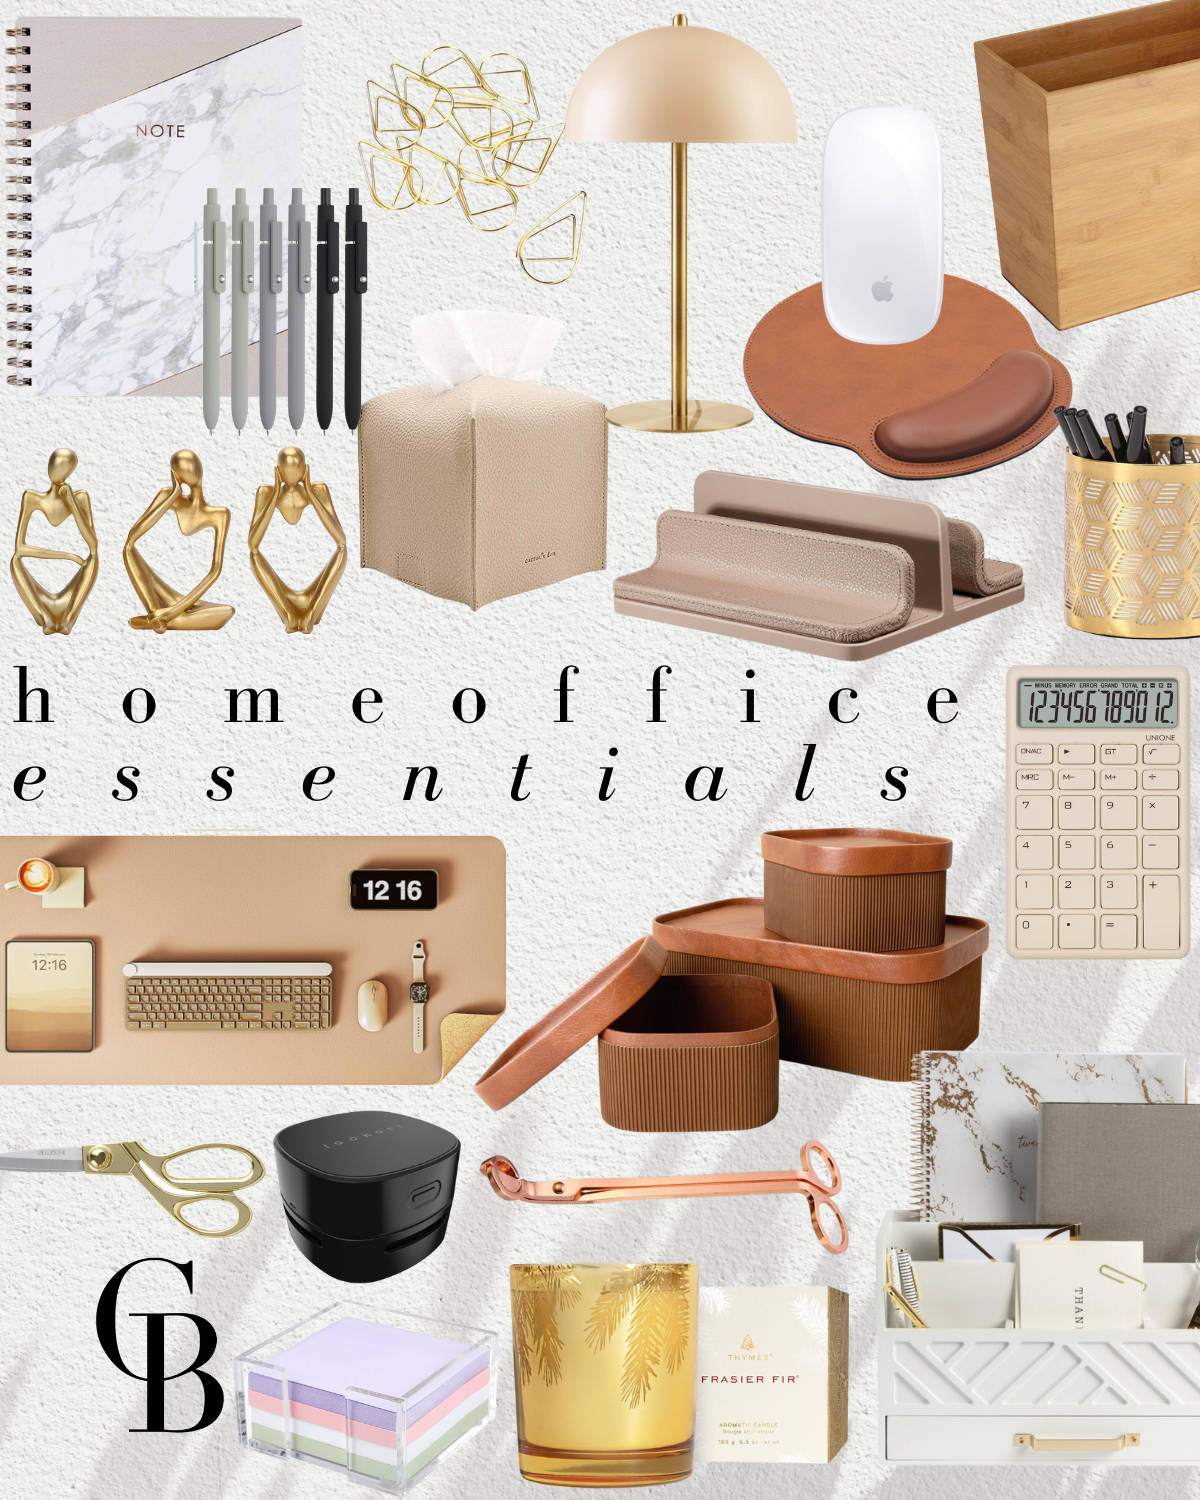 Re-Decorate and Organize Your Home Office | Home, home office, re-decorate, home office essentials, small office finds, remote work, work from home, lighting, desk, desktop accessories